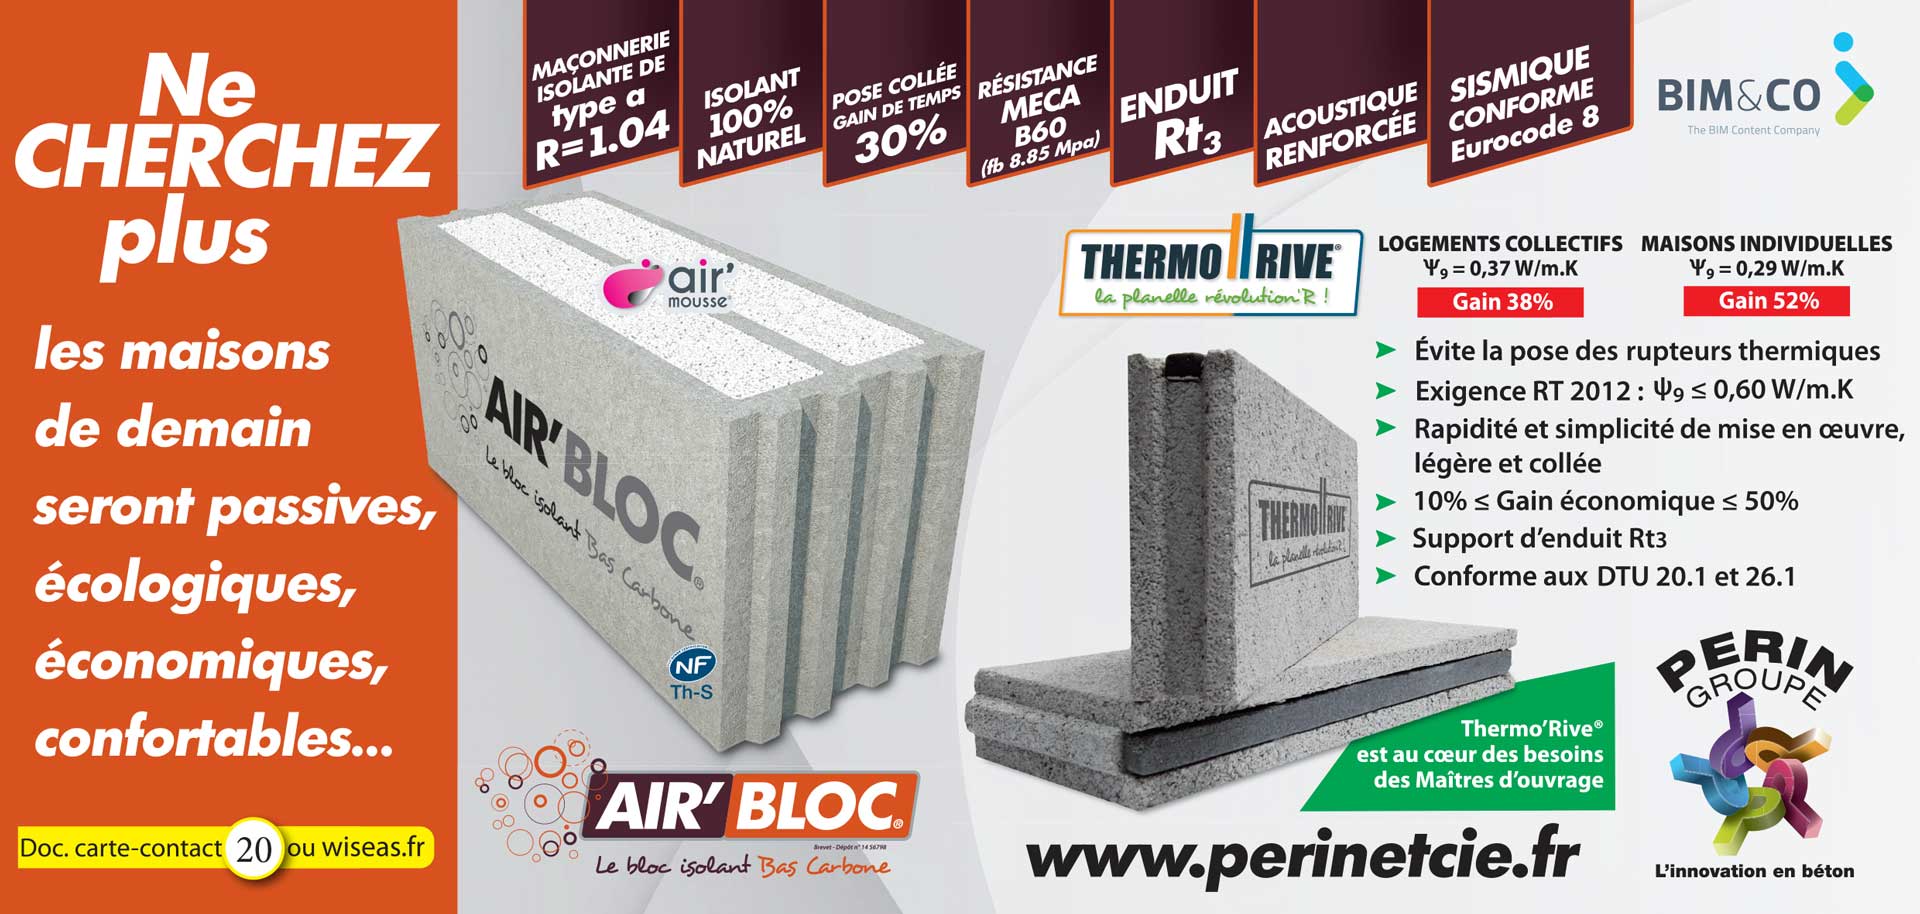 Air/Bloc, Thermo'Rive